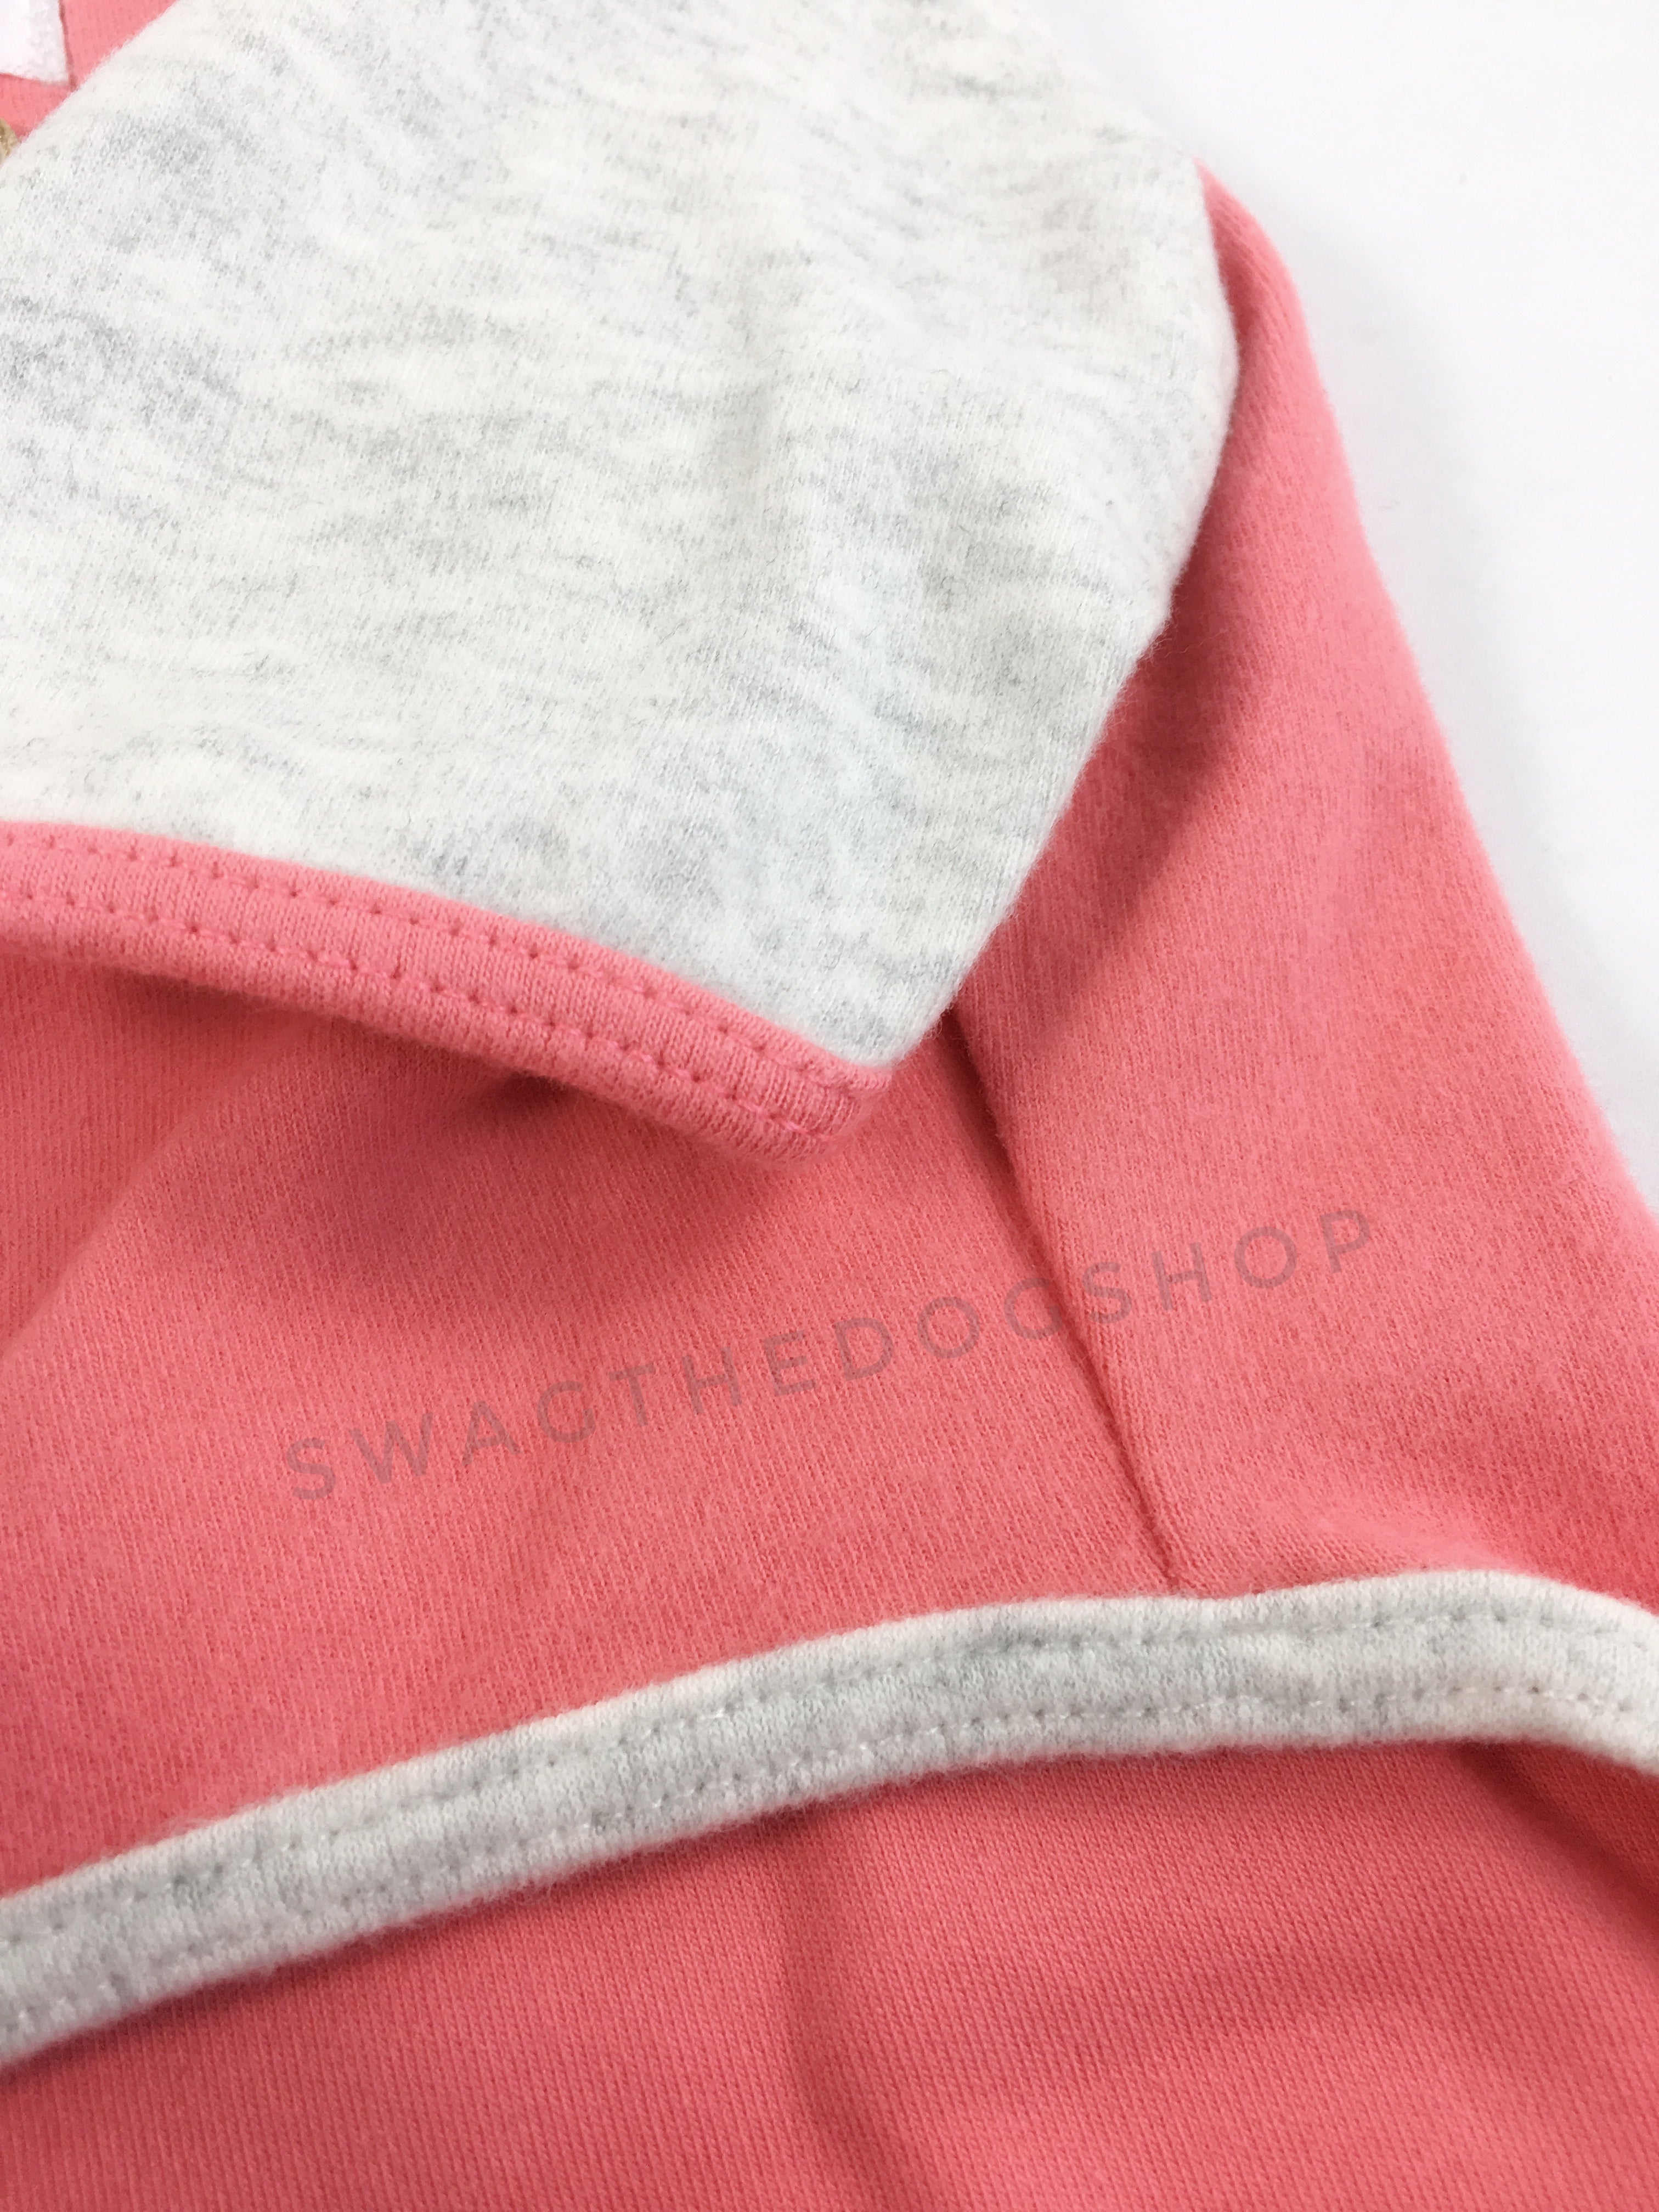 Surfside Salmon Pink Polo Shirt - Close Up View of Sleeve. Salmon Pink with Light Gray Sleeves Polo Shirt